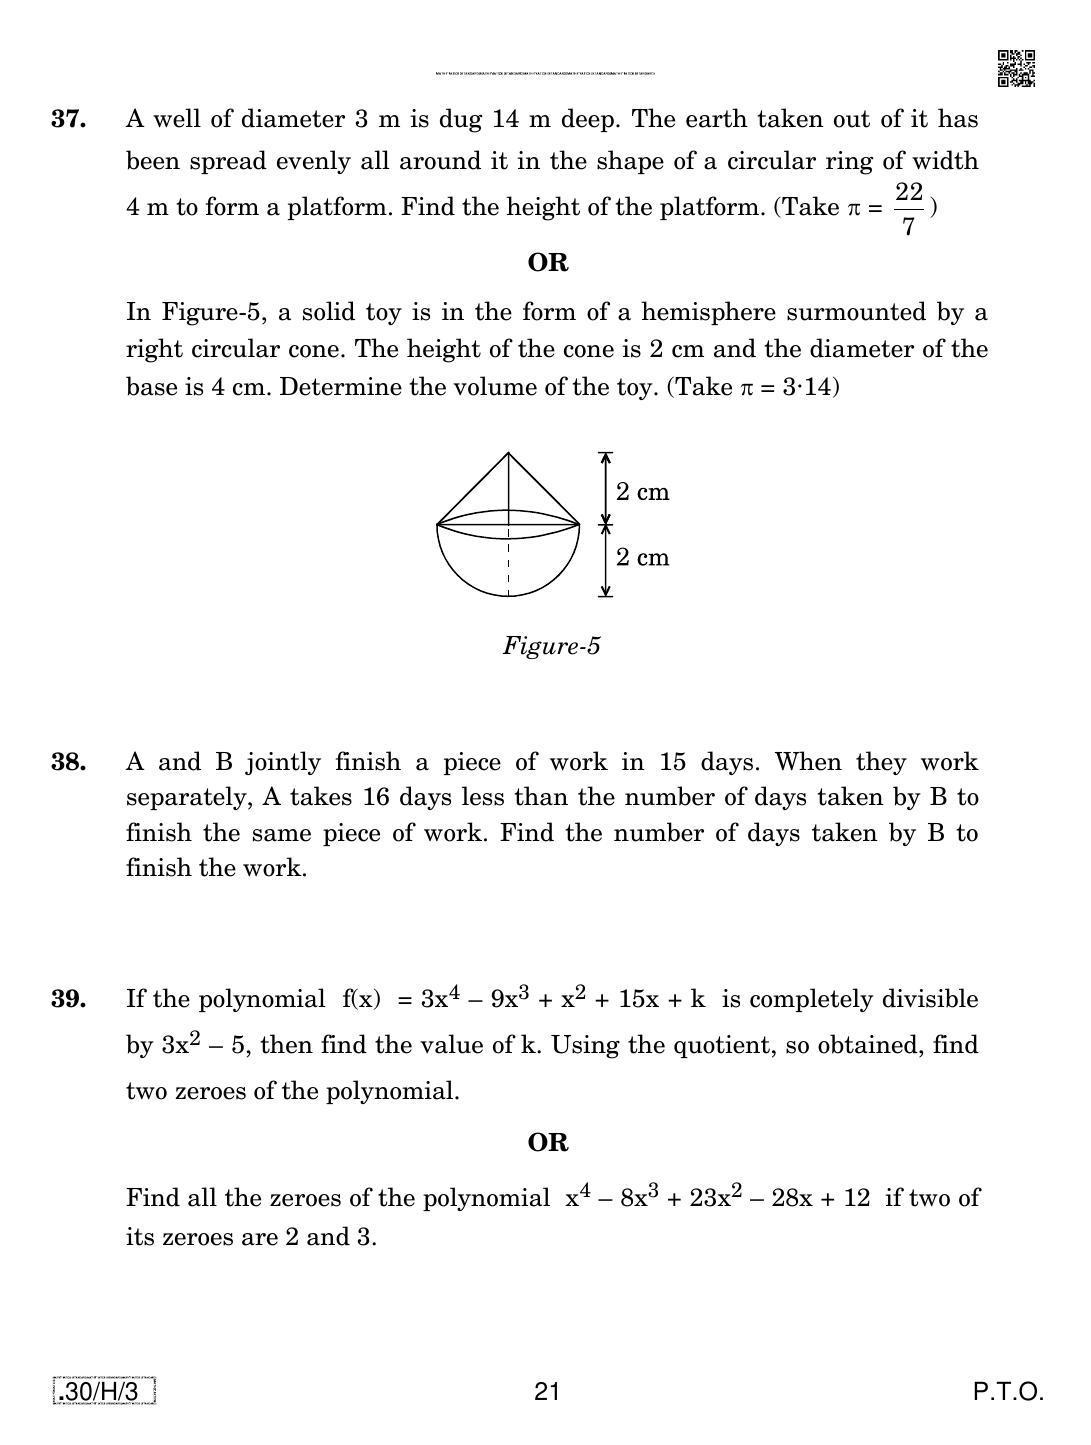 CBSE Class 10 30-C-3 - Maths (Standard) 2020 Compartment Question Paper - Page 21